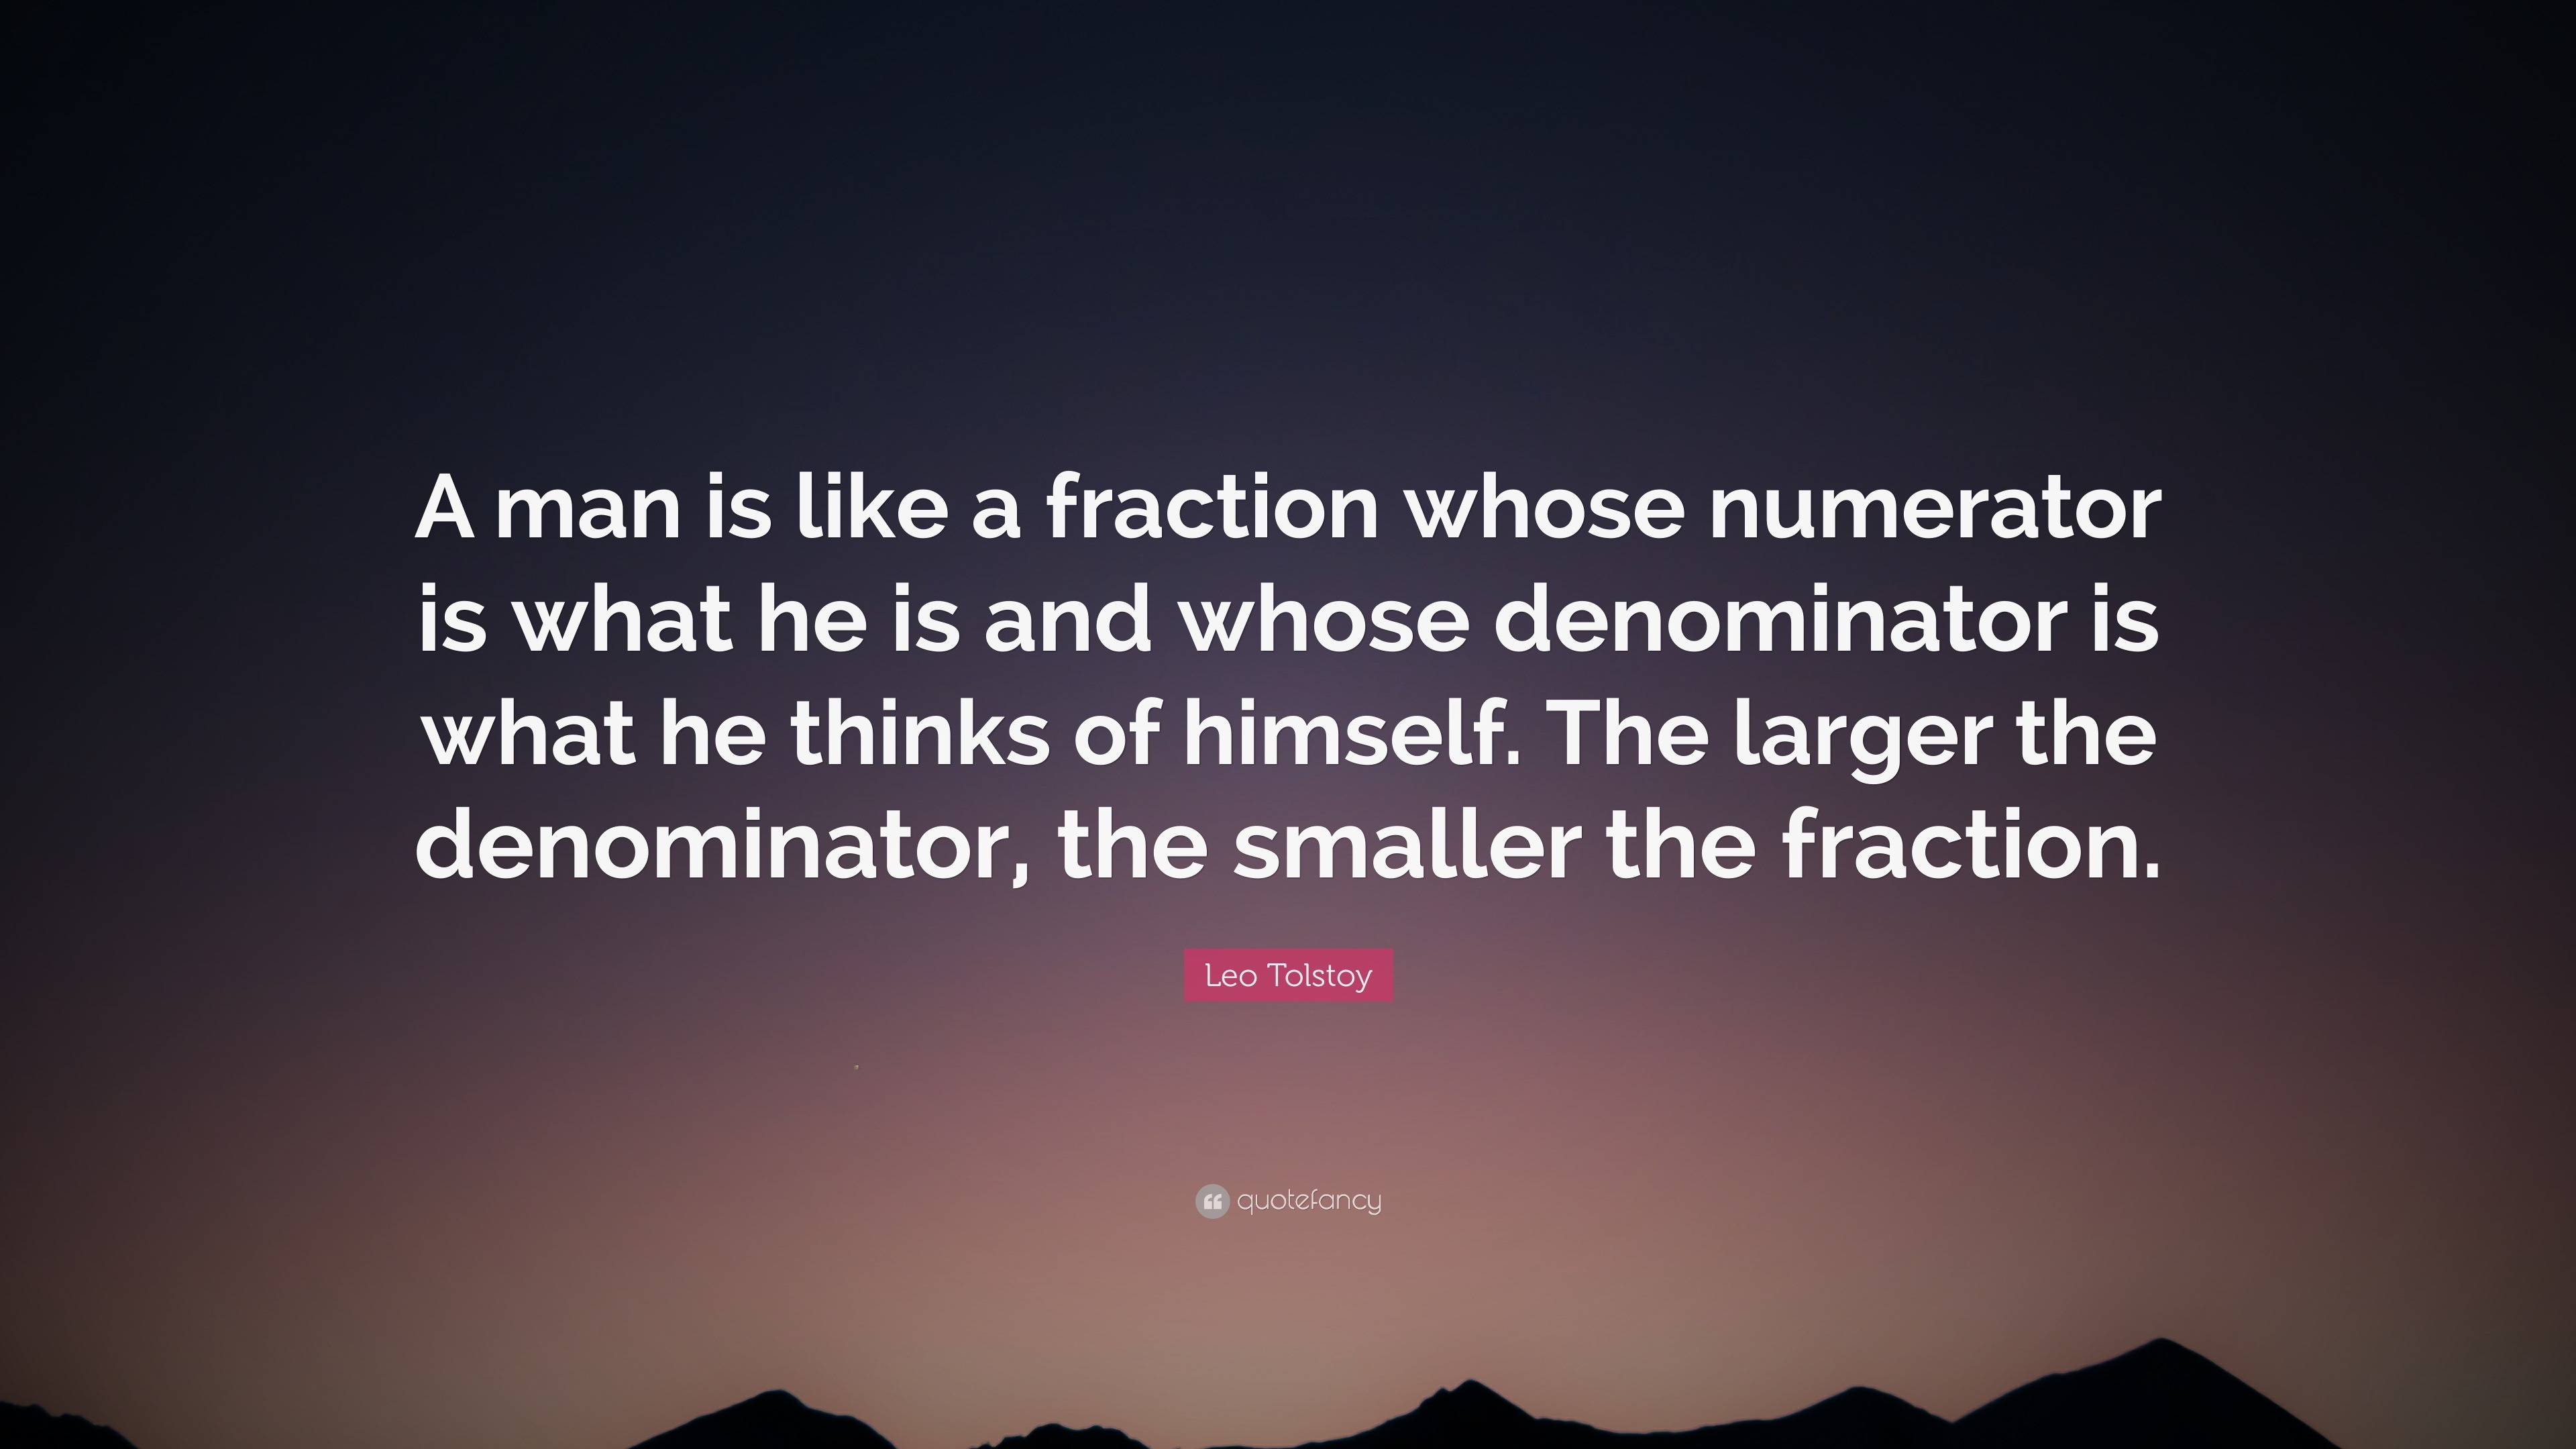 1726822 Leo Tolstoy Quote A man is like a fraction whose numerator is what